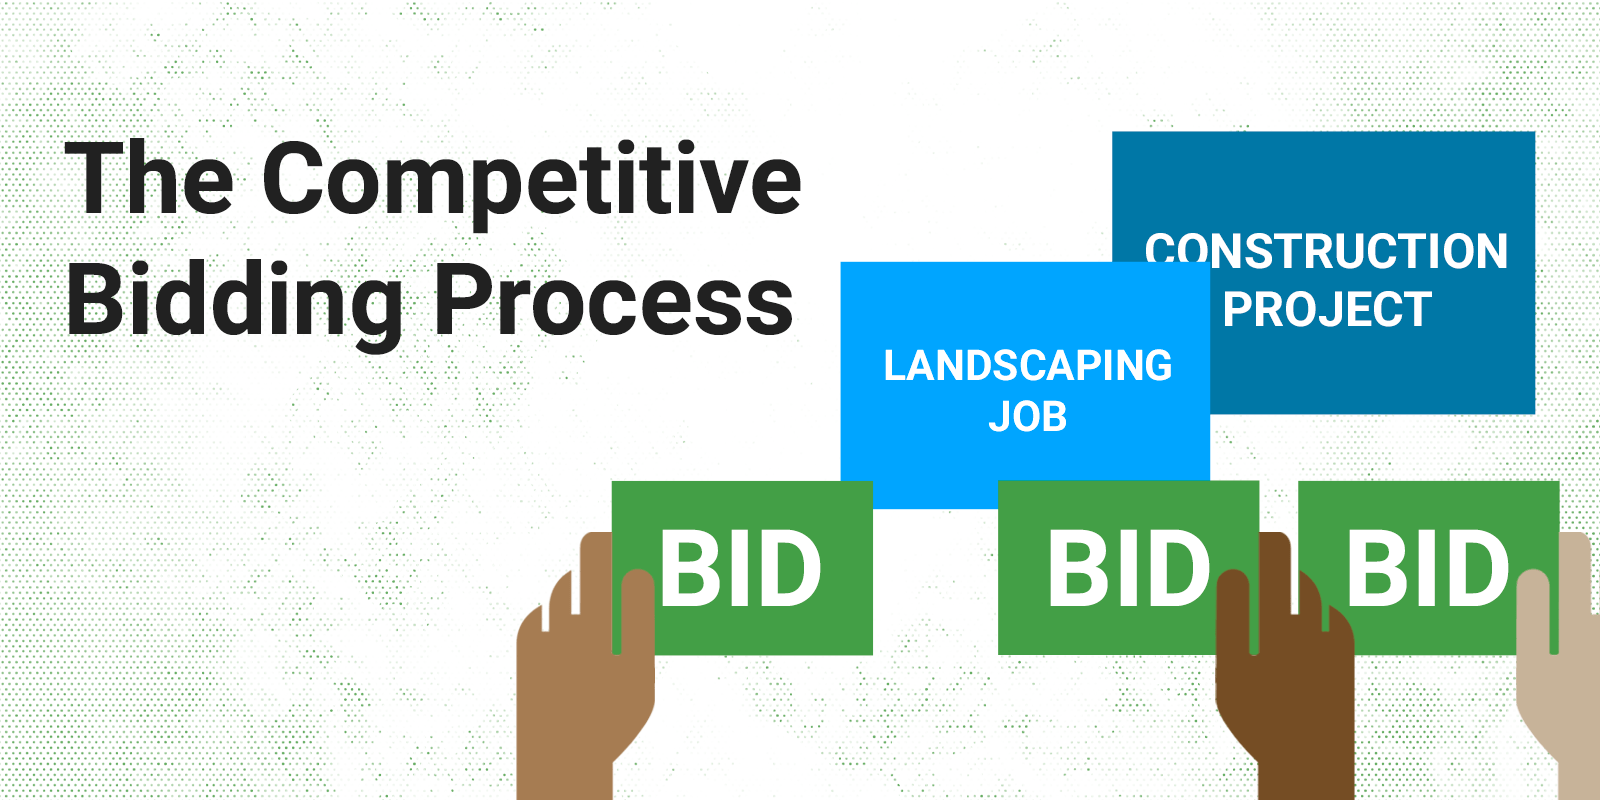 Ultimate Information rutine Competitive Bidding Process: The Ultimate Guide in 2021 - Ventract